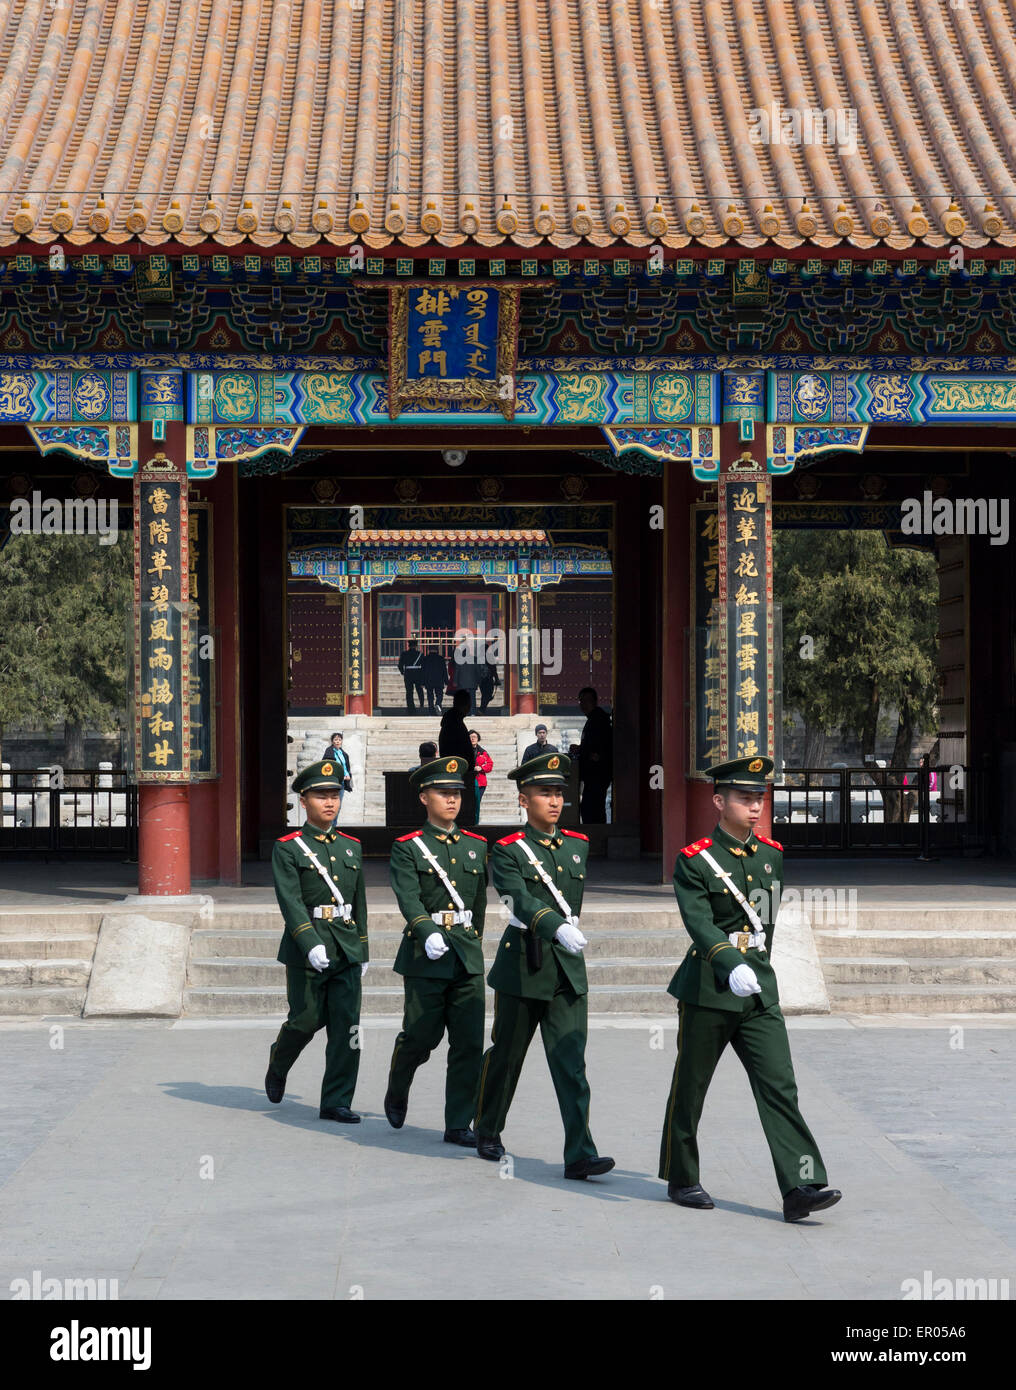 Chinese soldiers marching at the Summer Palace in Beijing Stock Photo